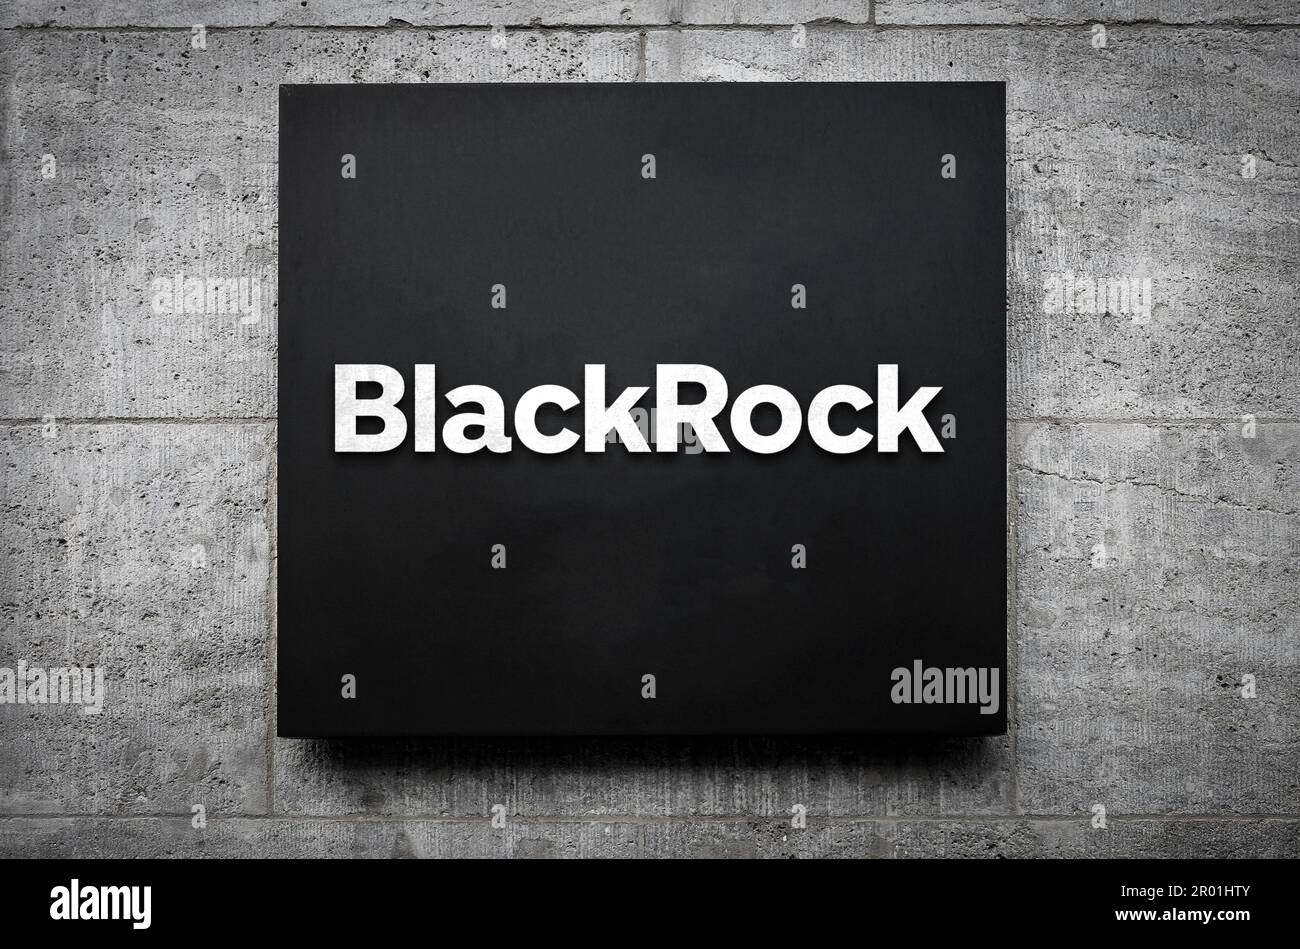 BlackRock - American multi national investment company based in New York City Stock Photo